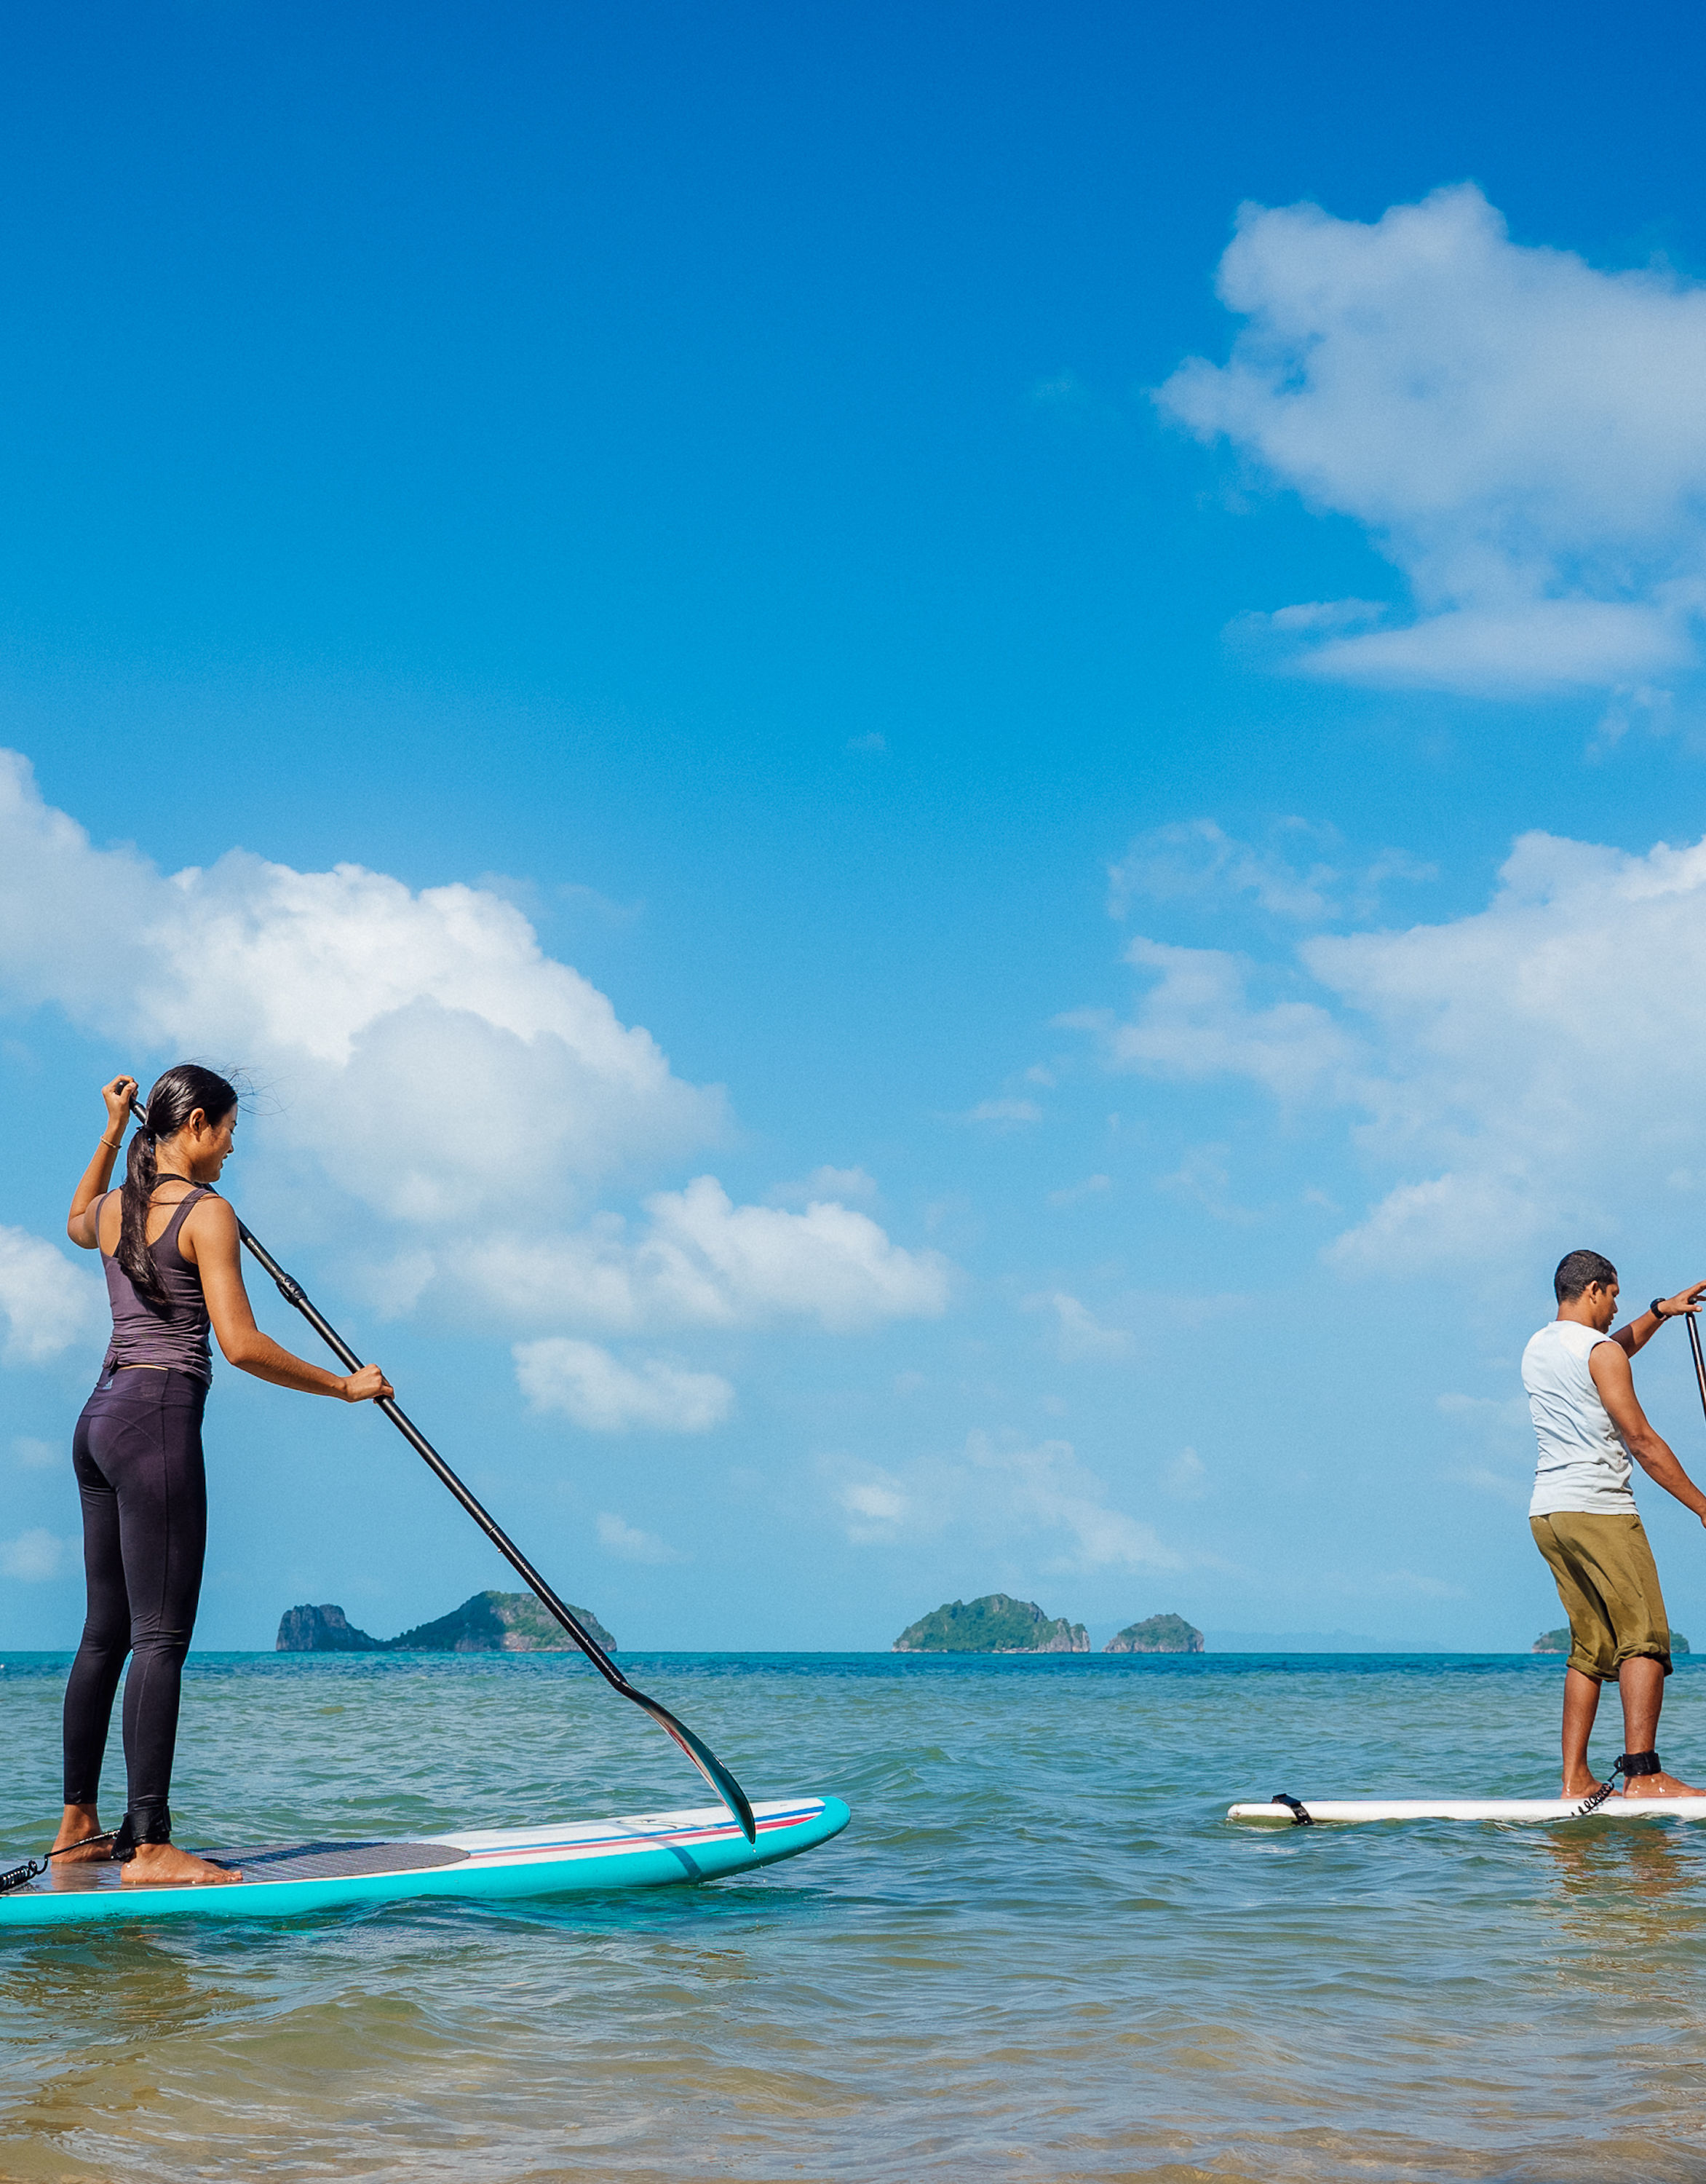 Man and Woman on a Surfboard on the Water